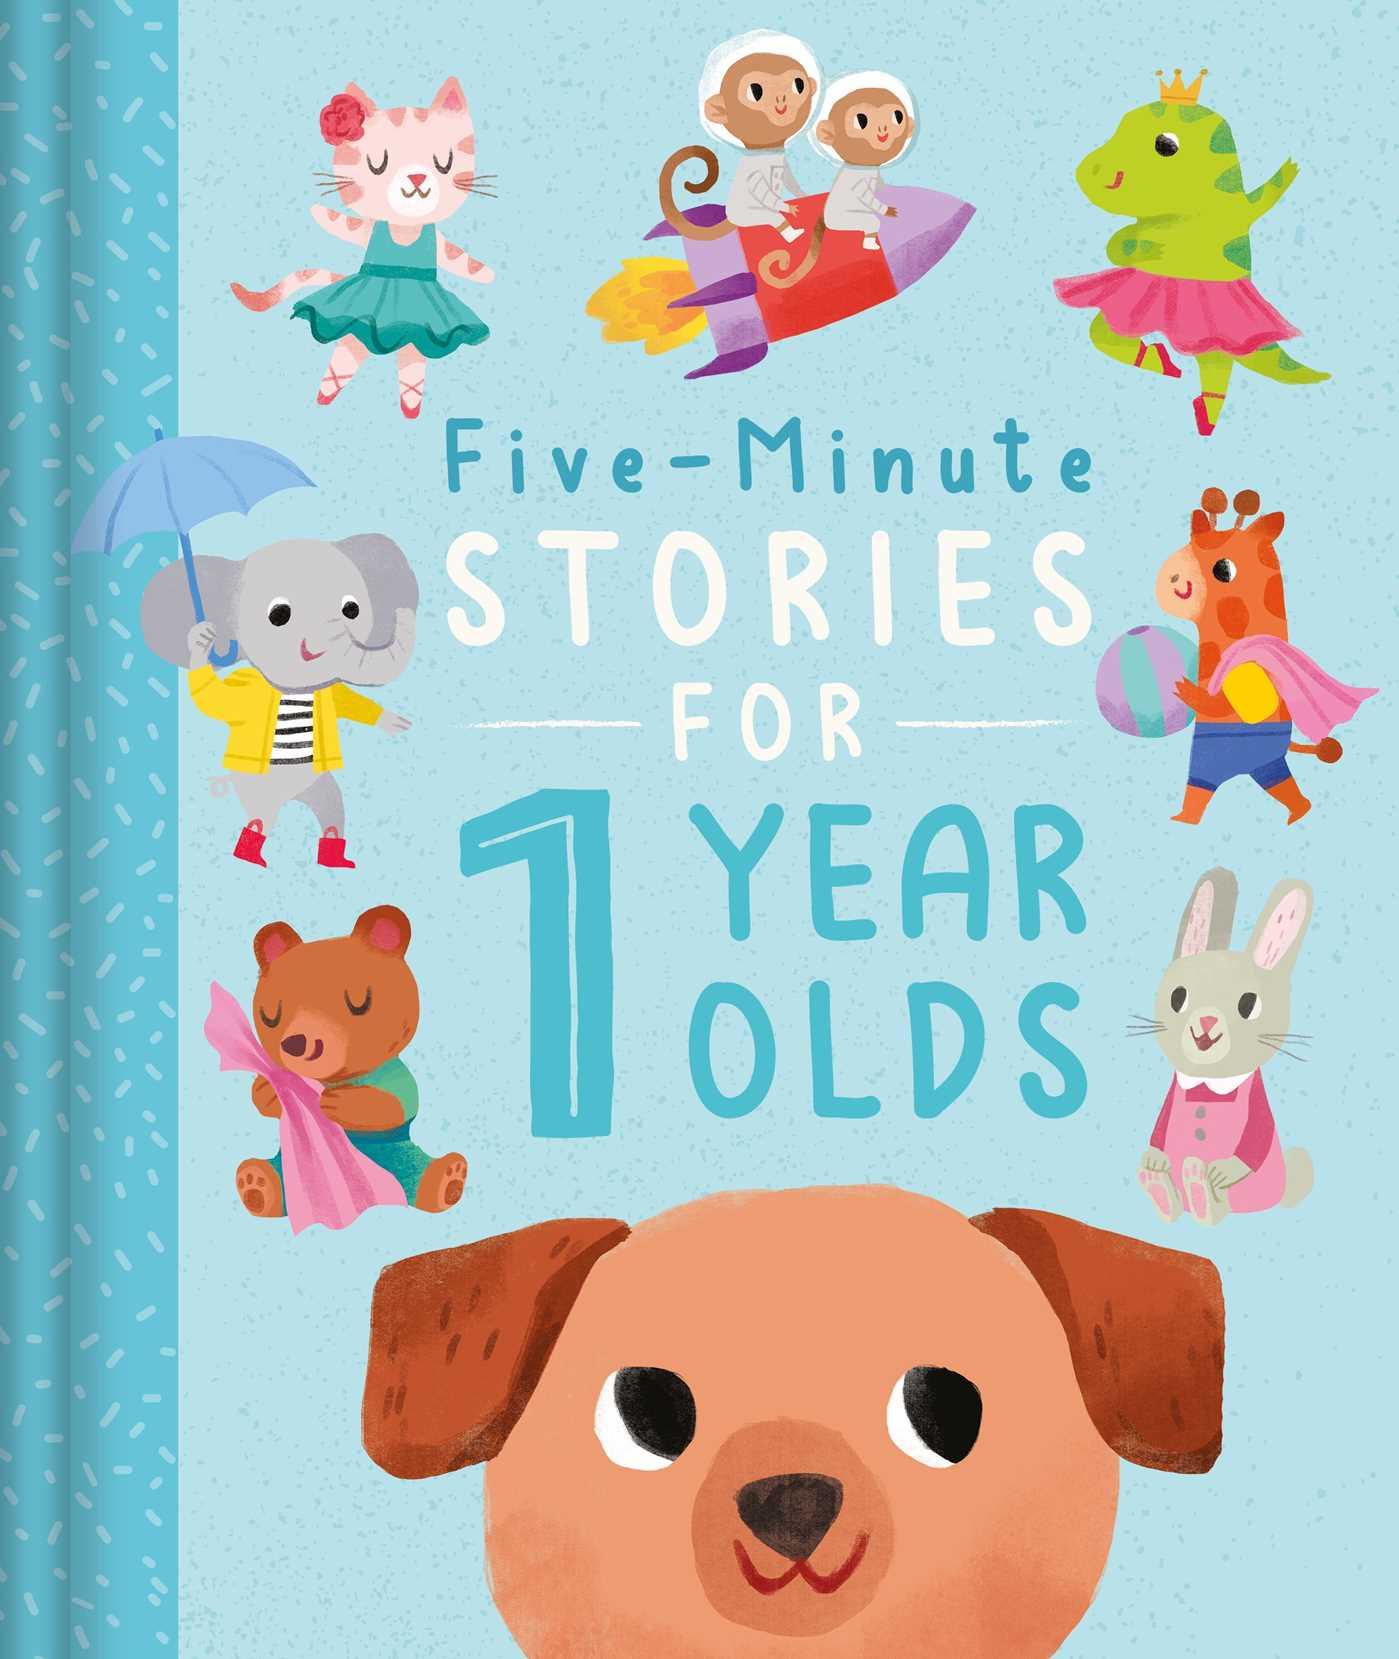 Kniha Five-Minute Stories for 1 Year Olds: With 7 Stories, 1 for Every Day of the Week Kathryn Selbert